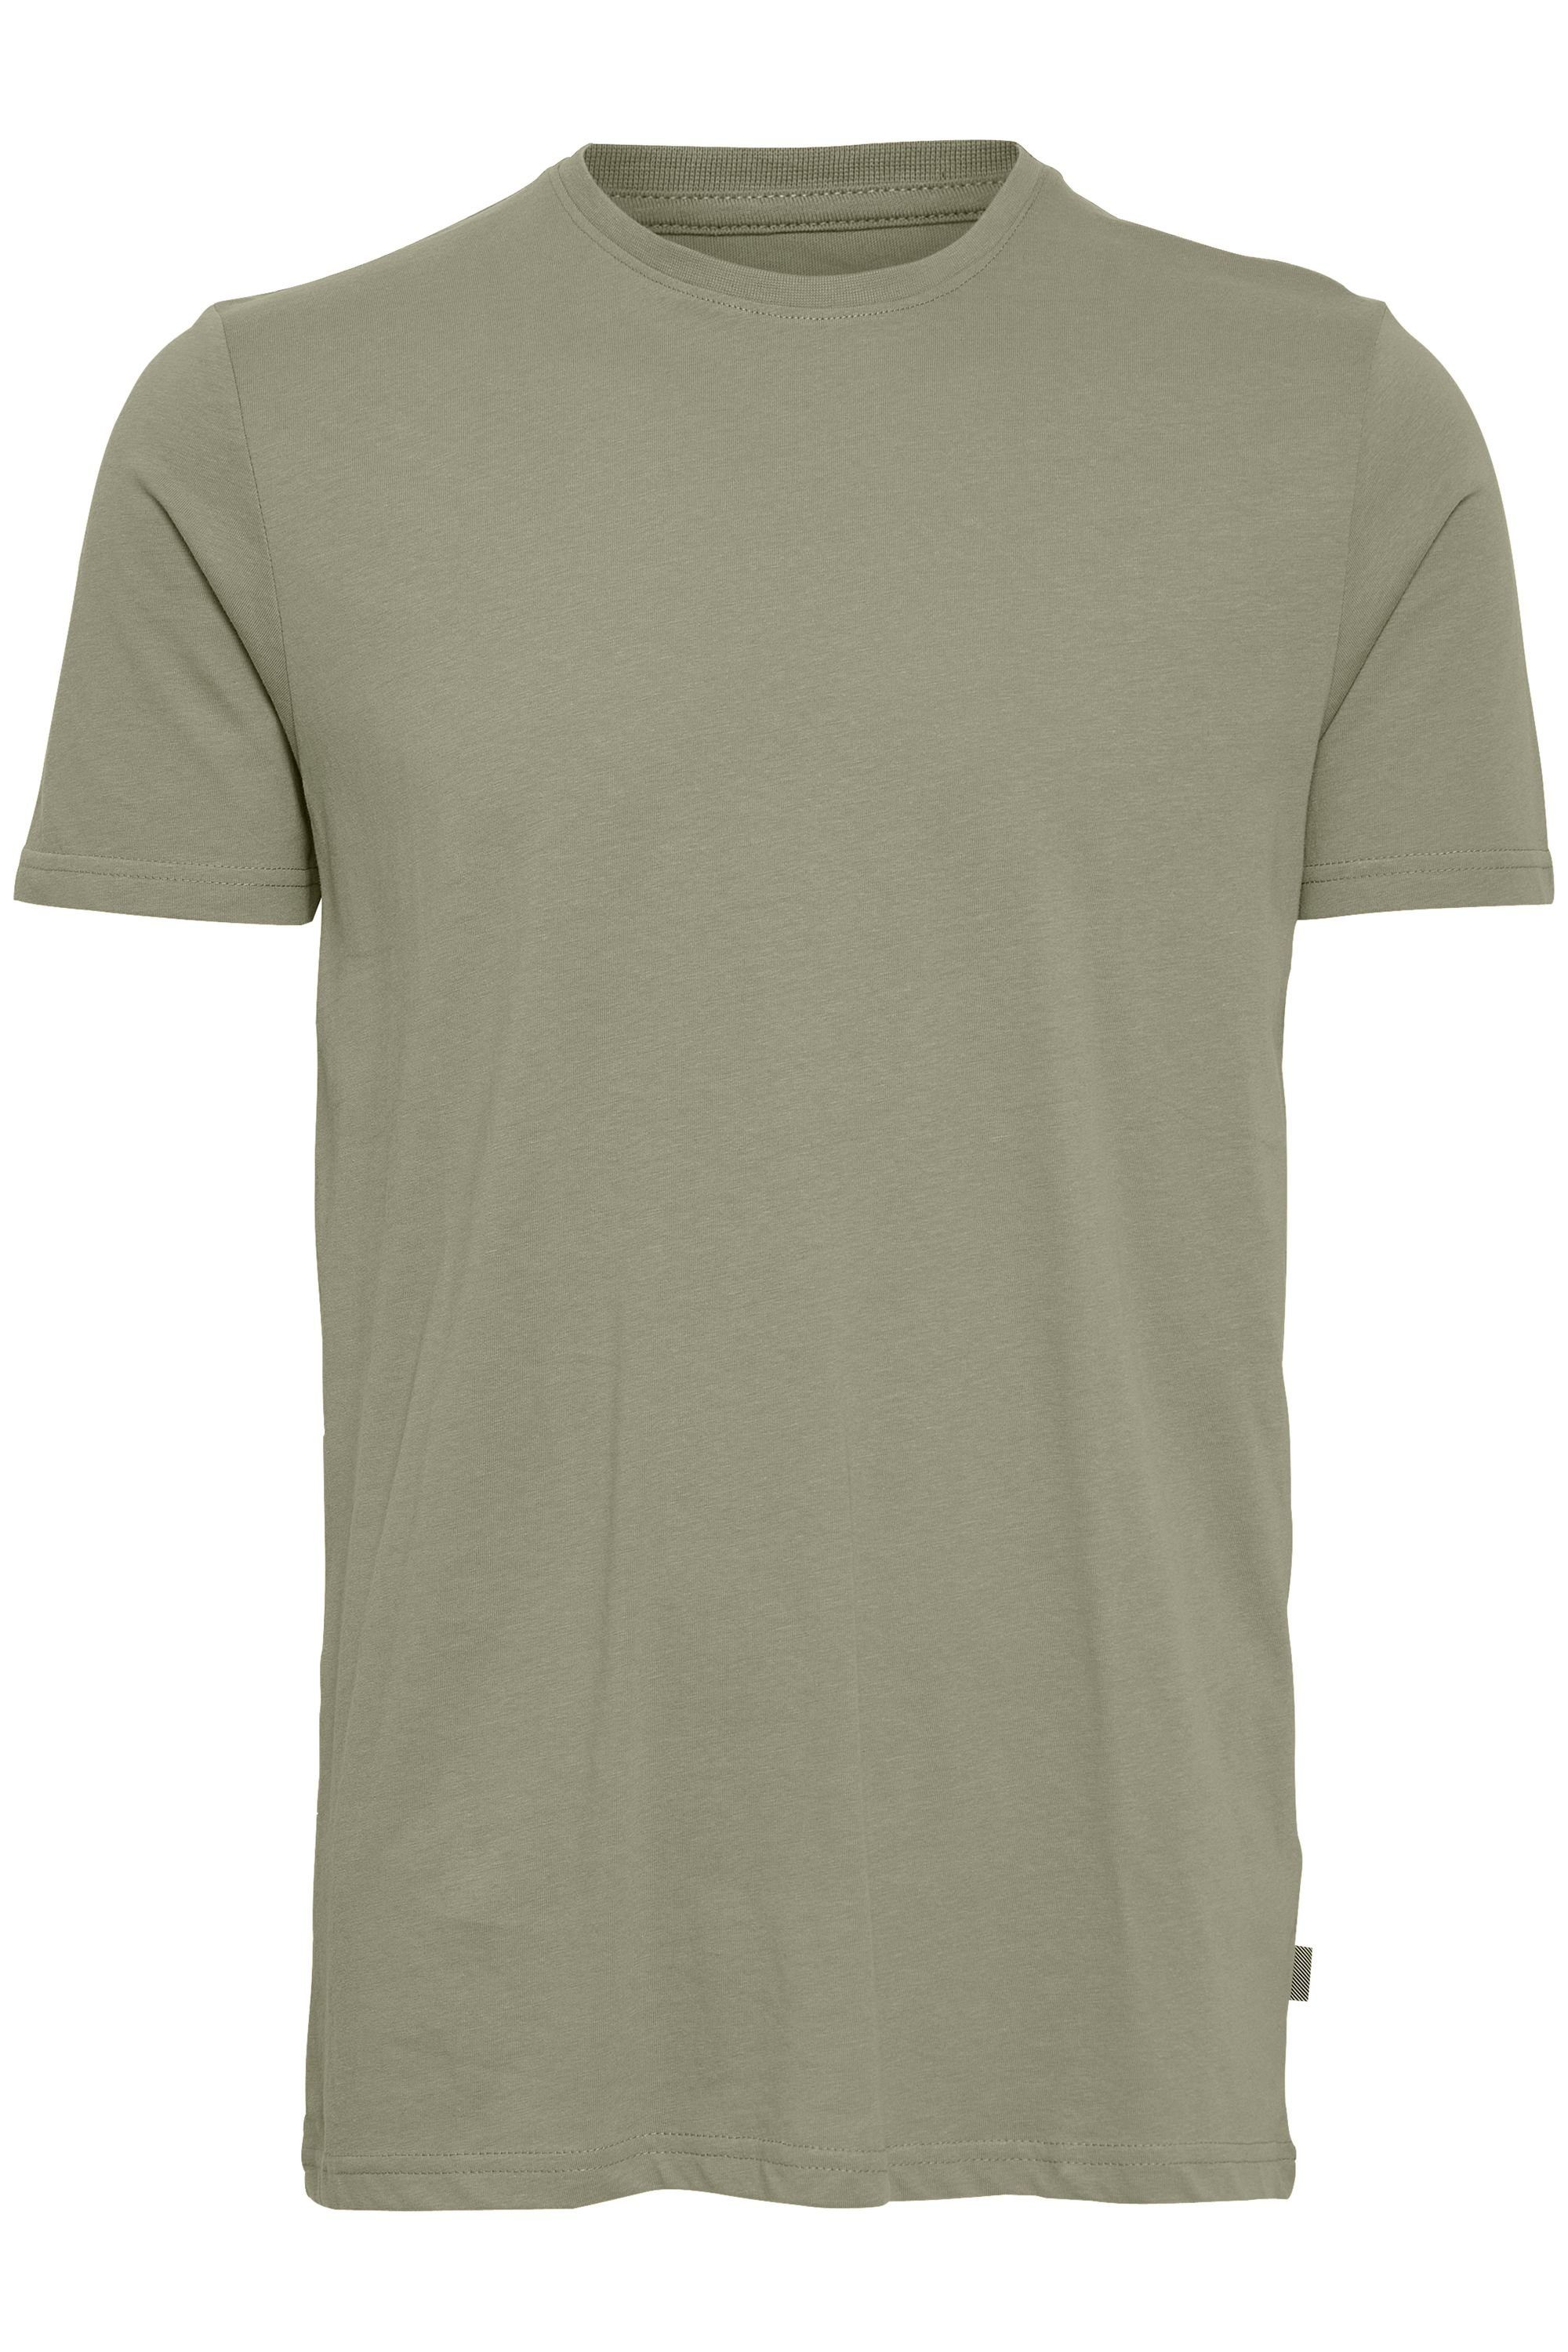 Rock SS Vetiver - T-Shirt - 21103651 (170613) !Solid 6194761, Tee